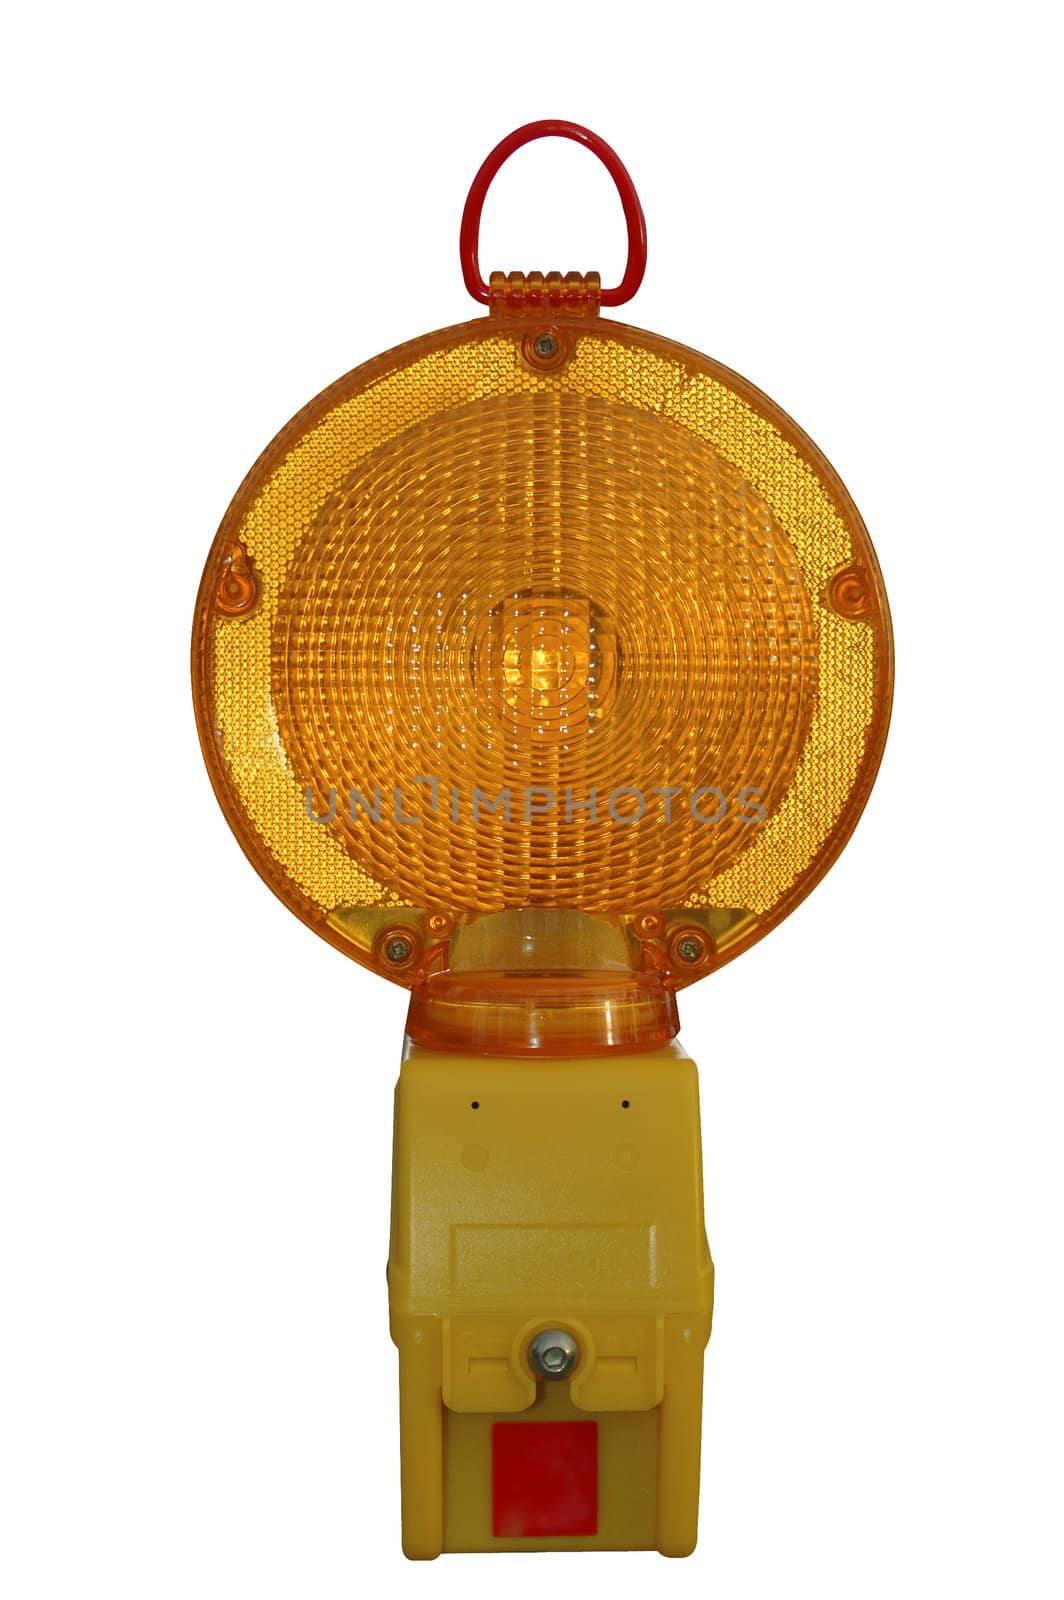 Roadworks warning lantern (with clipping path) by Bateleur